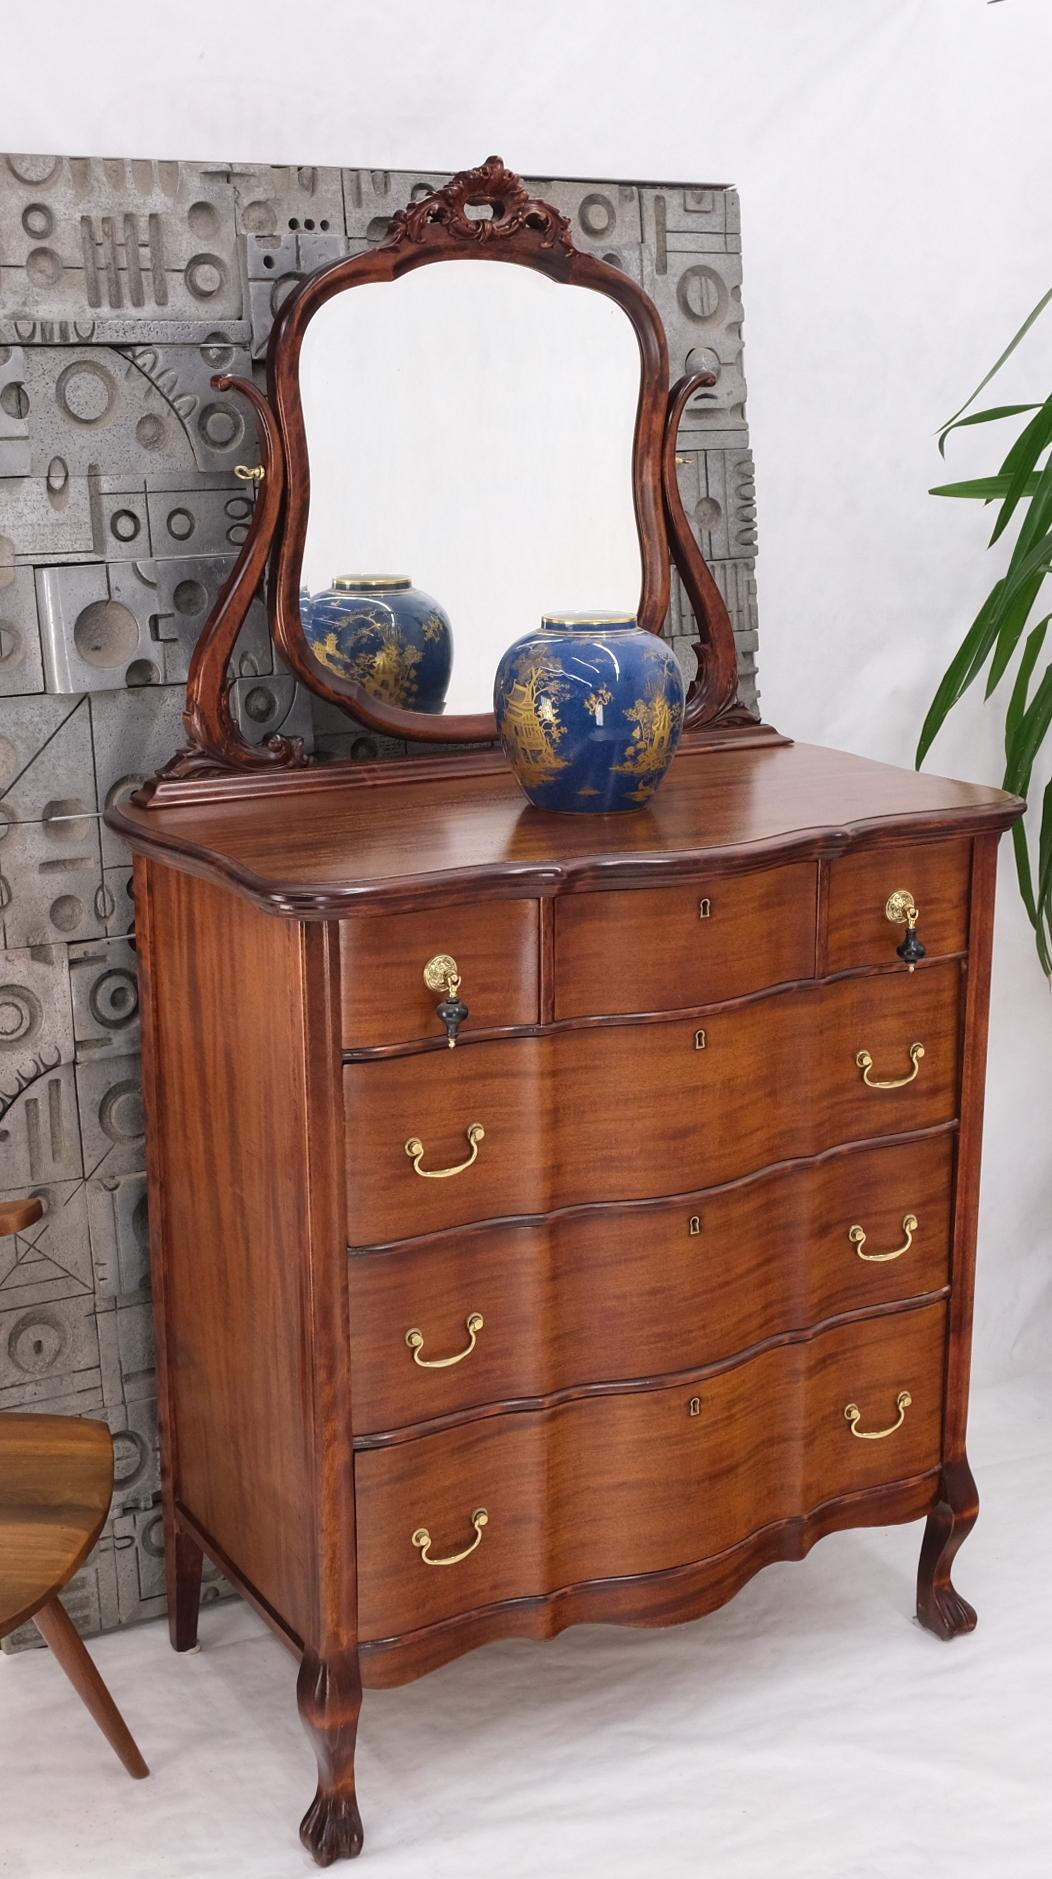 Serpentine Front 4 Drawers Swivel Mirror Mahogany Dresser High Chest Ball Claw 7